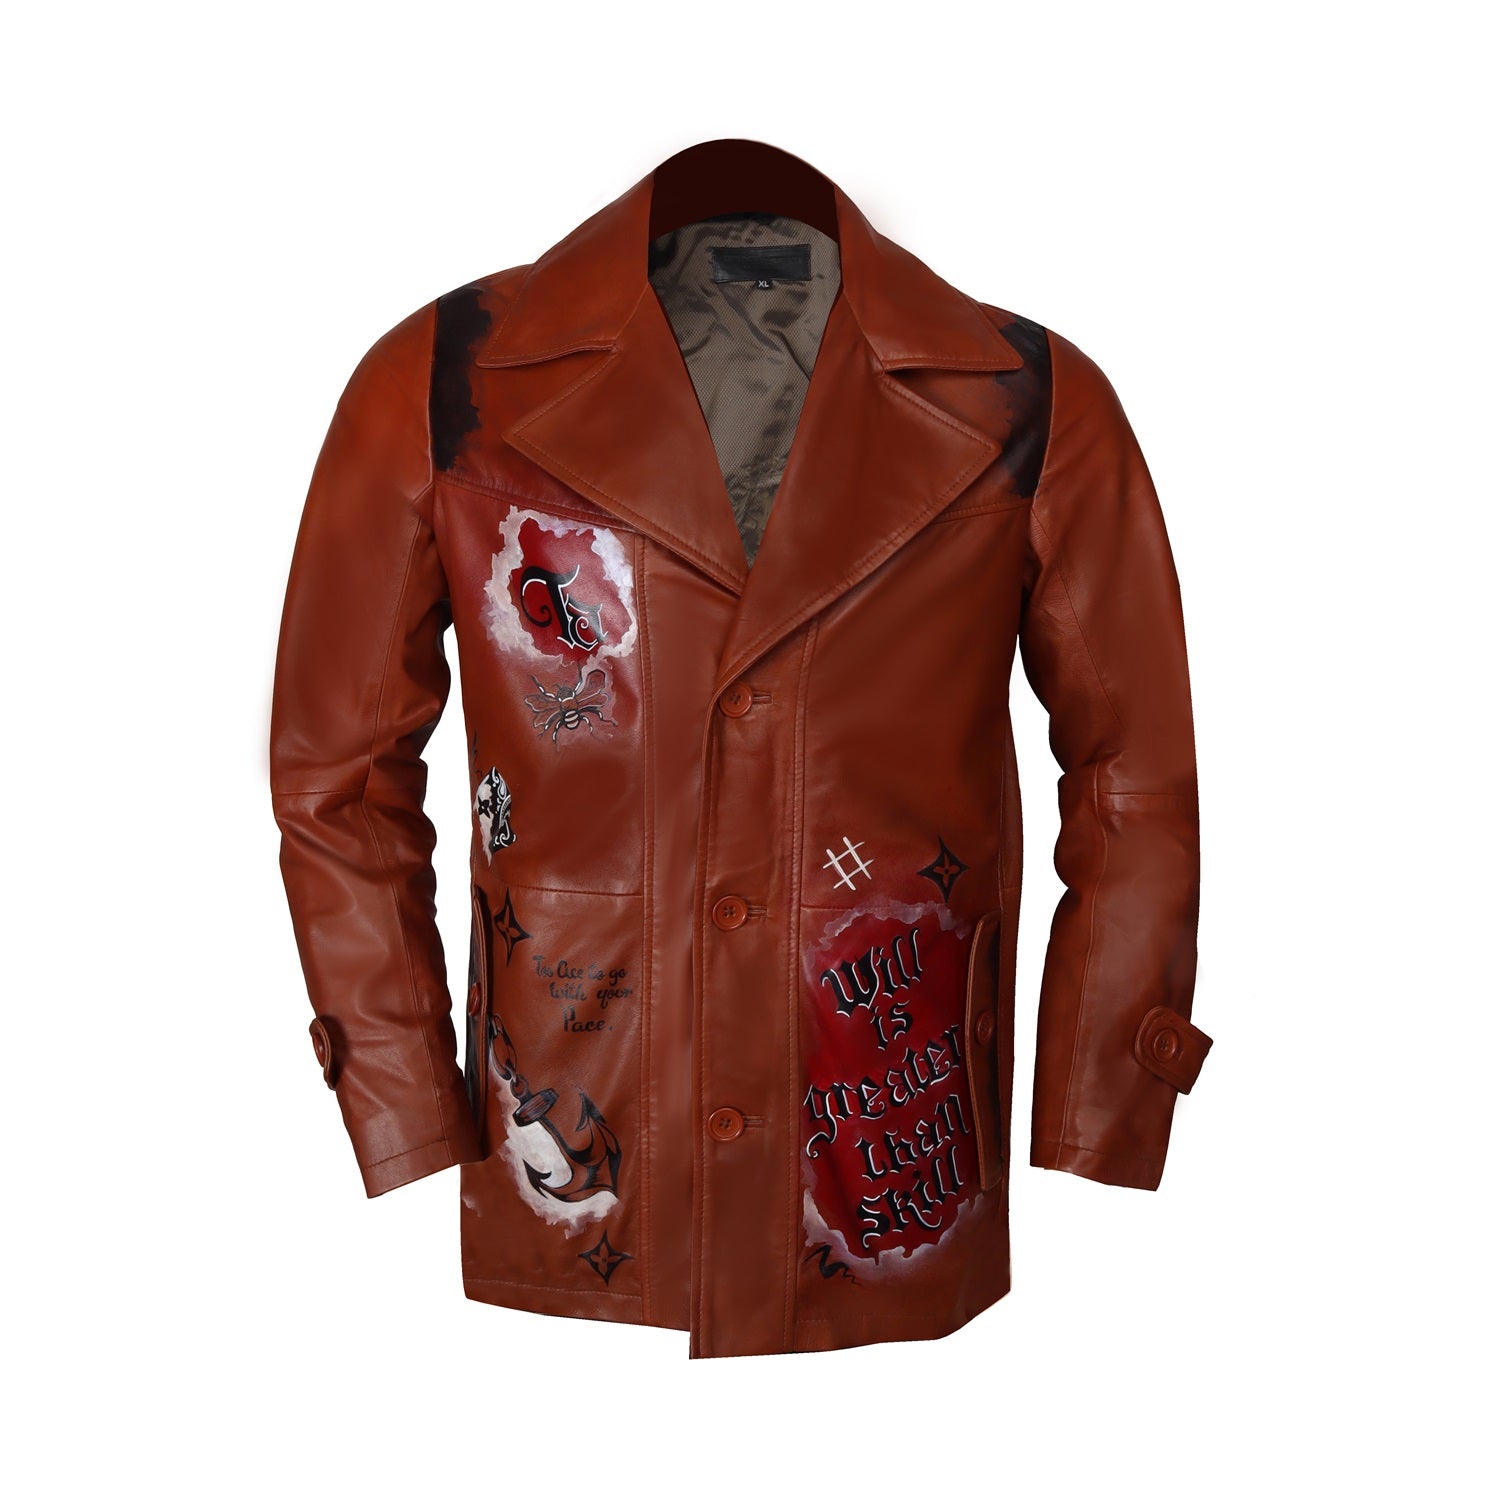 Hand Painted "Will-Skill" Multi-Color Quoted Tan Leather Jacket Coat By Brune & Bareskin